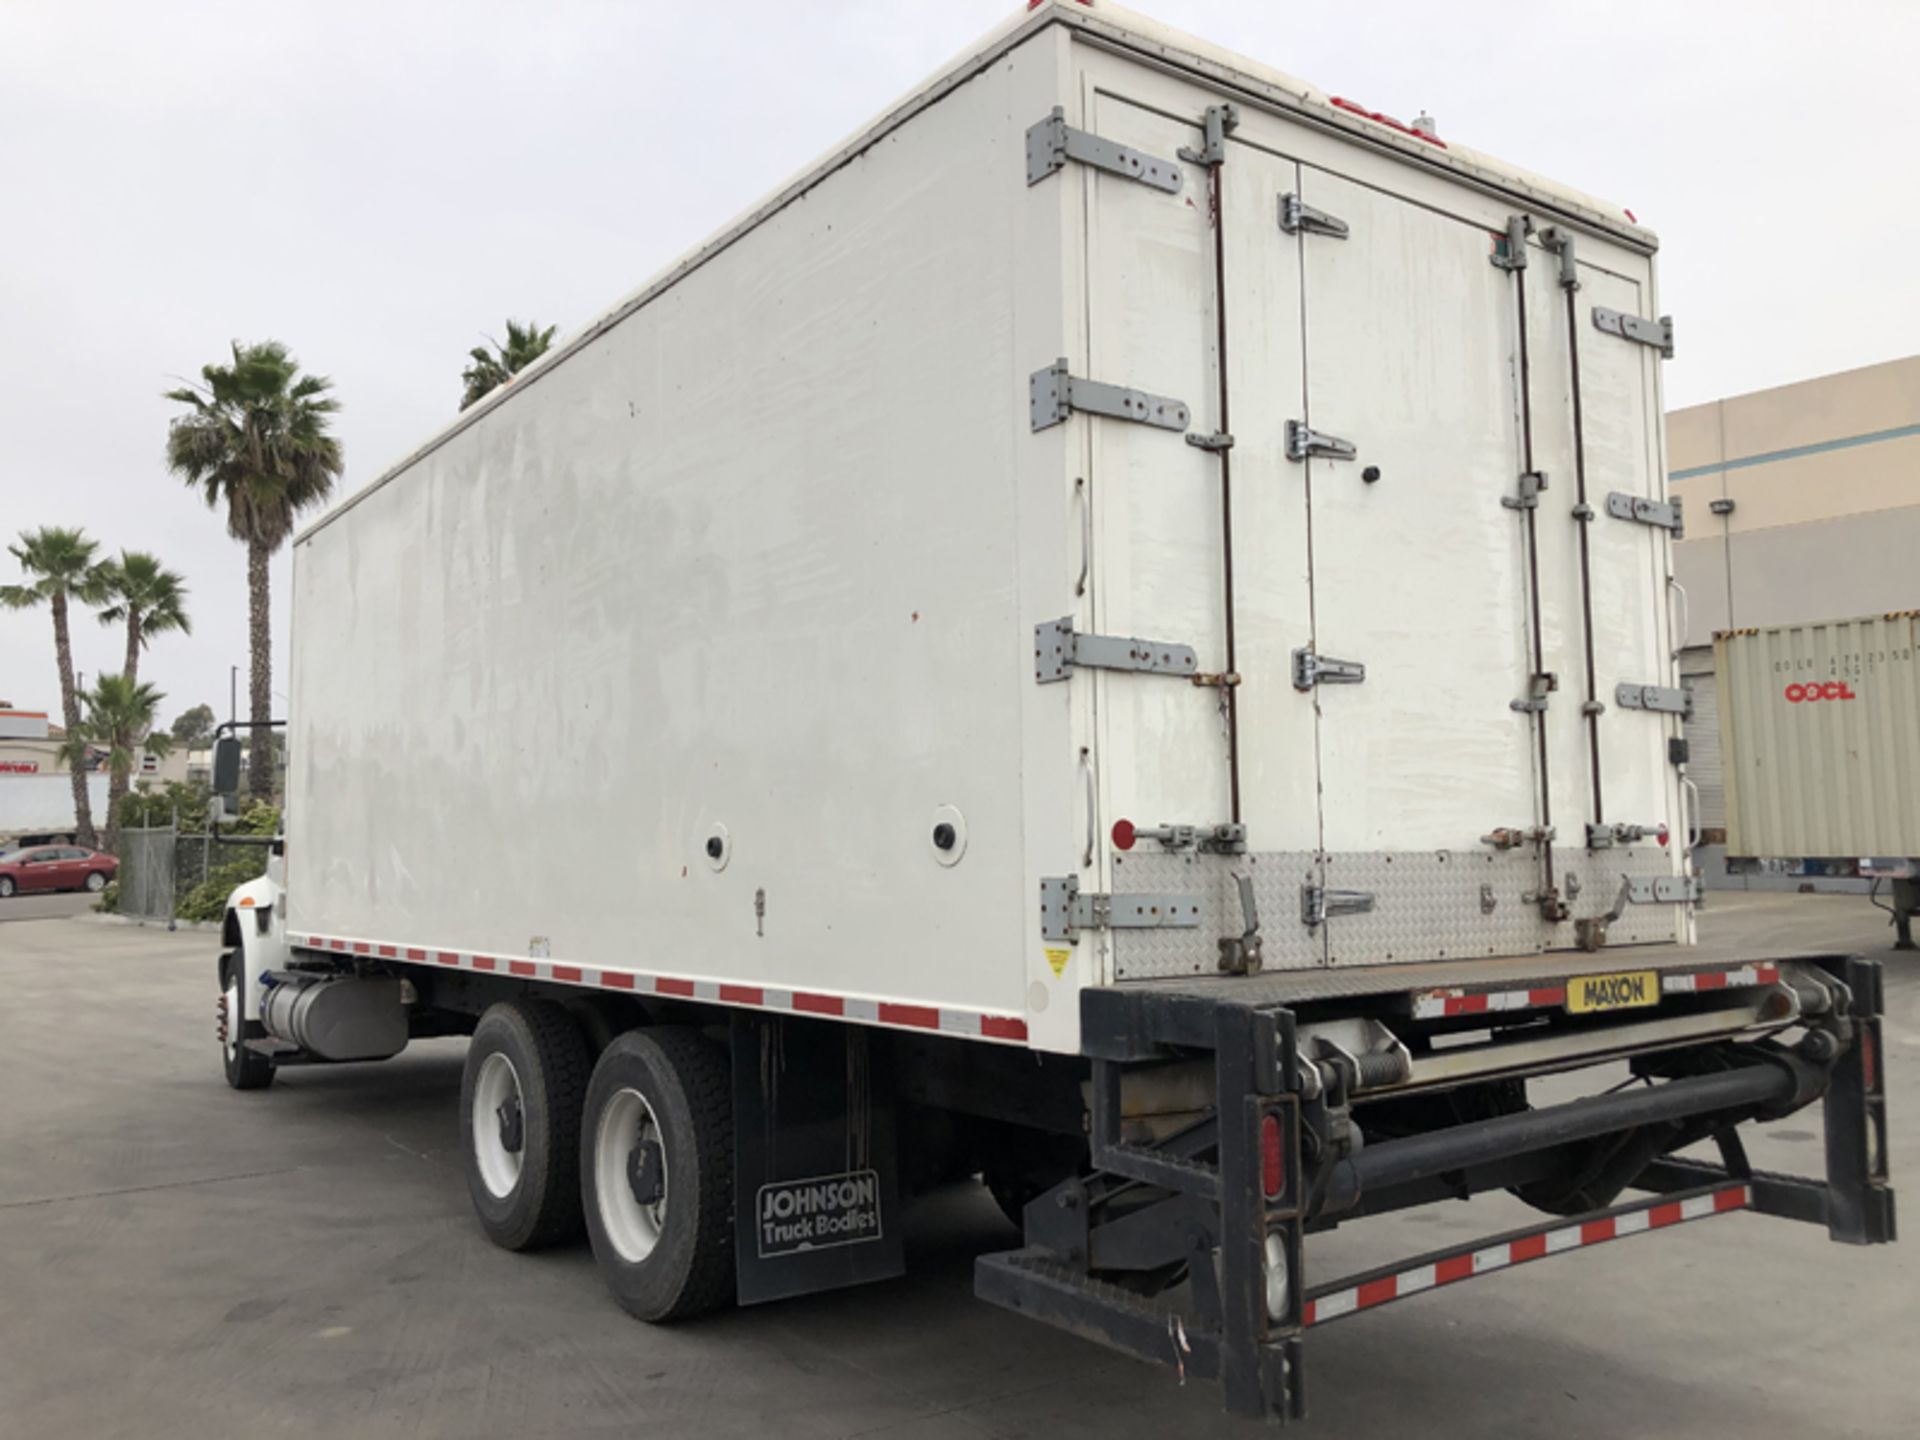 2018 INTERNATIONAL 4400 SBA 6X4 REFRIGERATED BOX TRUCK VIN#: 1HTMSTAR0JH529609, Approx Miles: 65133, - Image 7 of 10